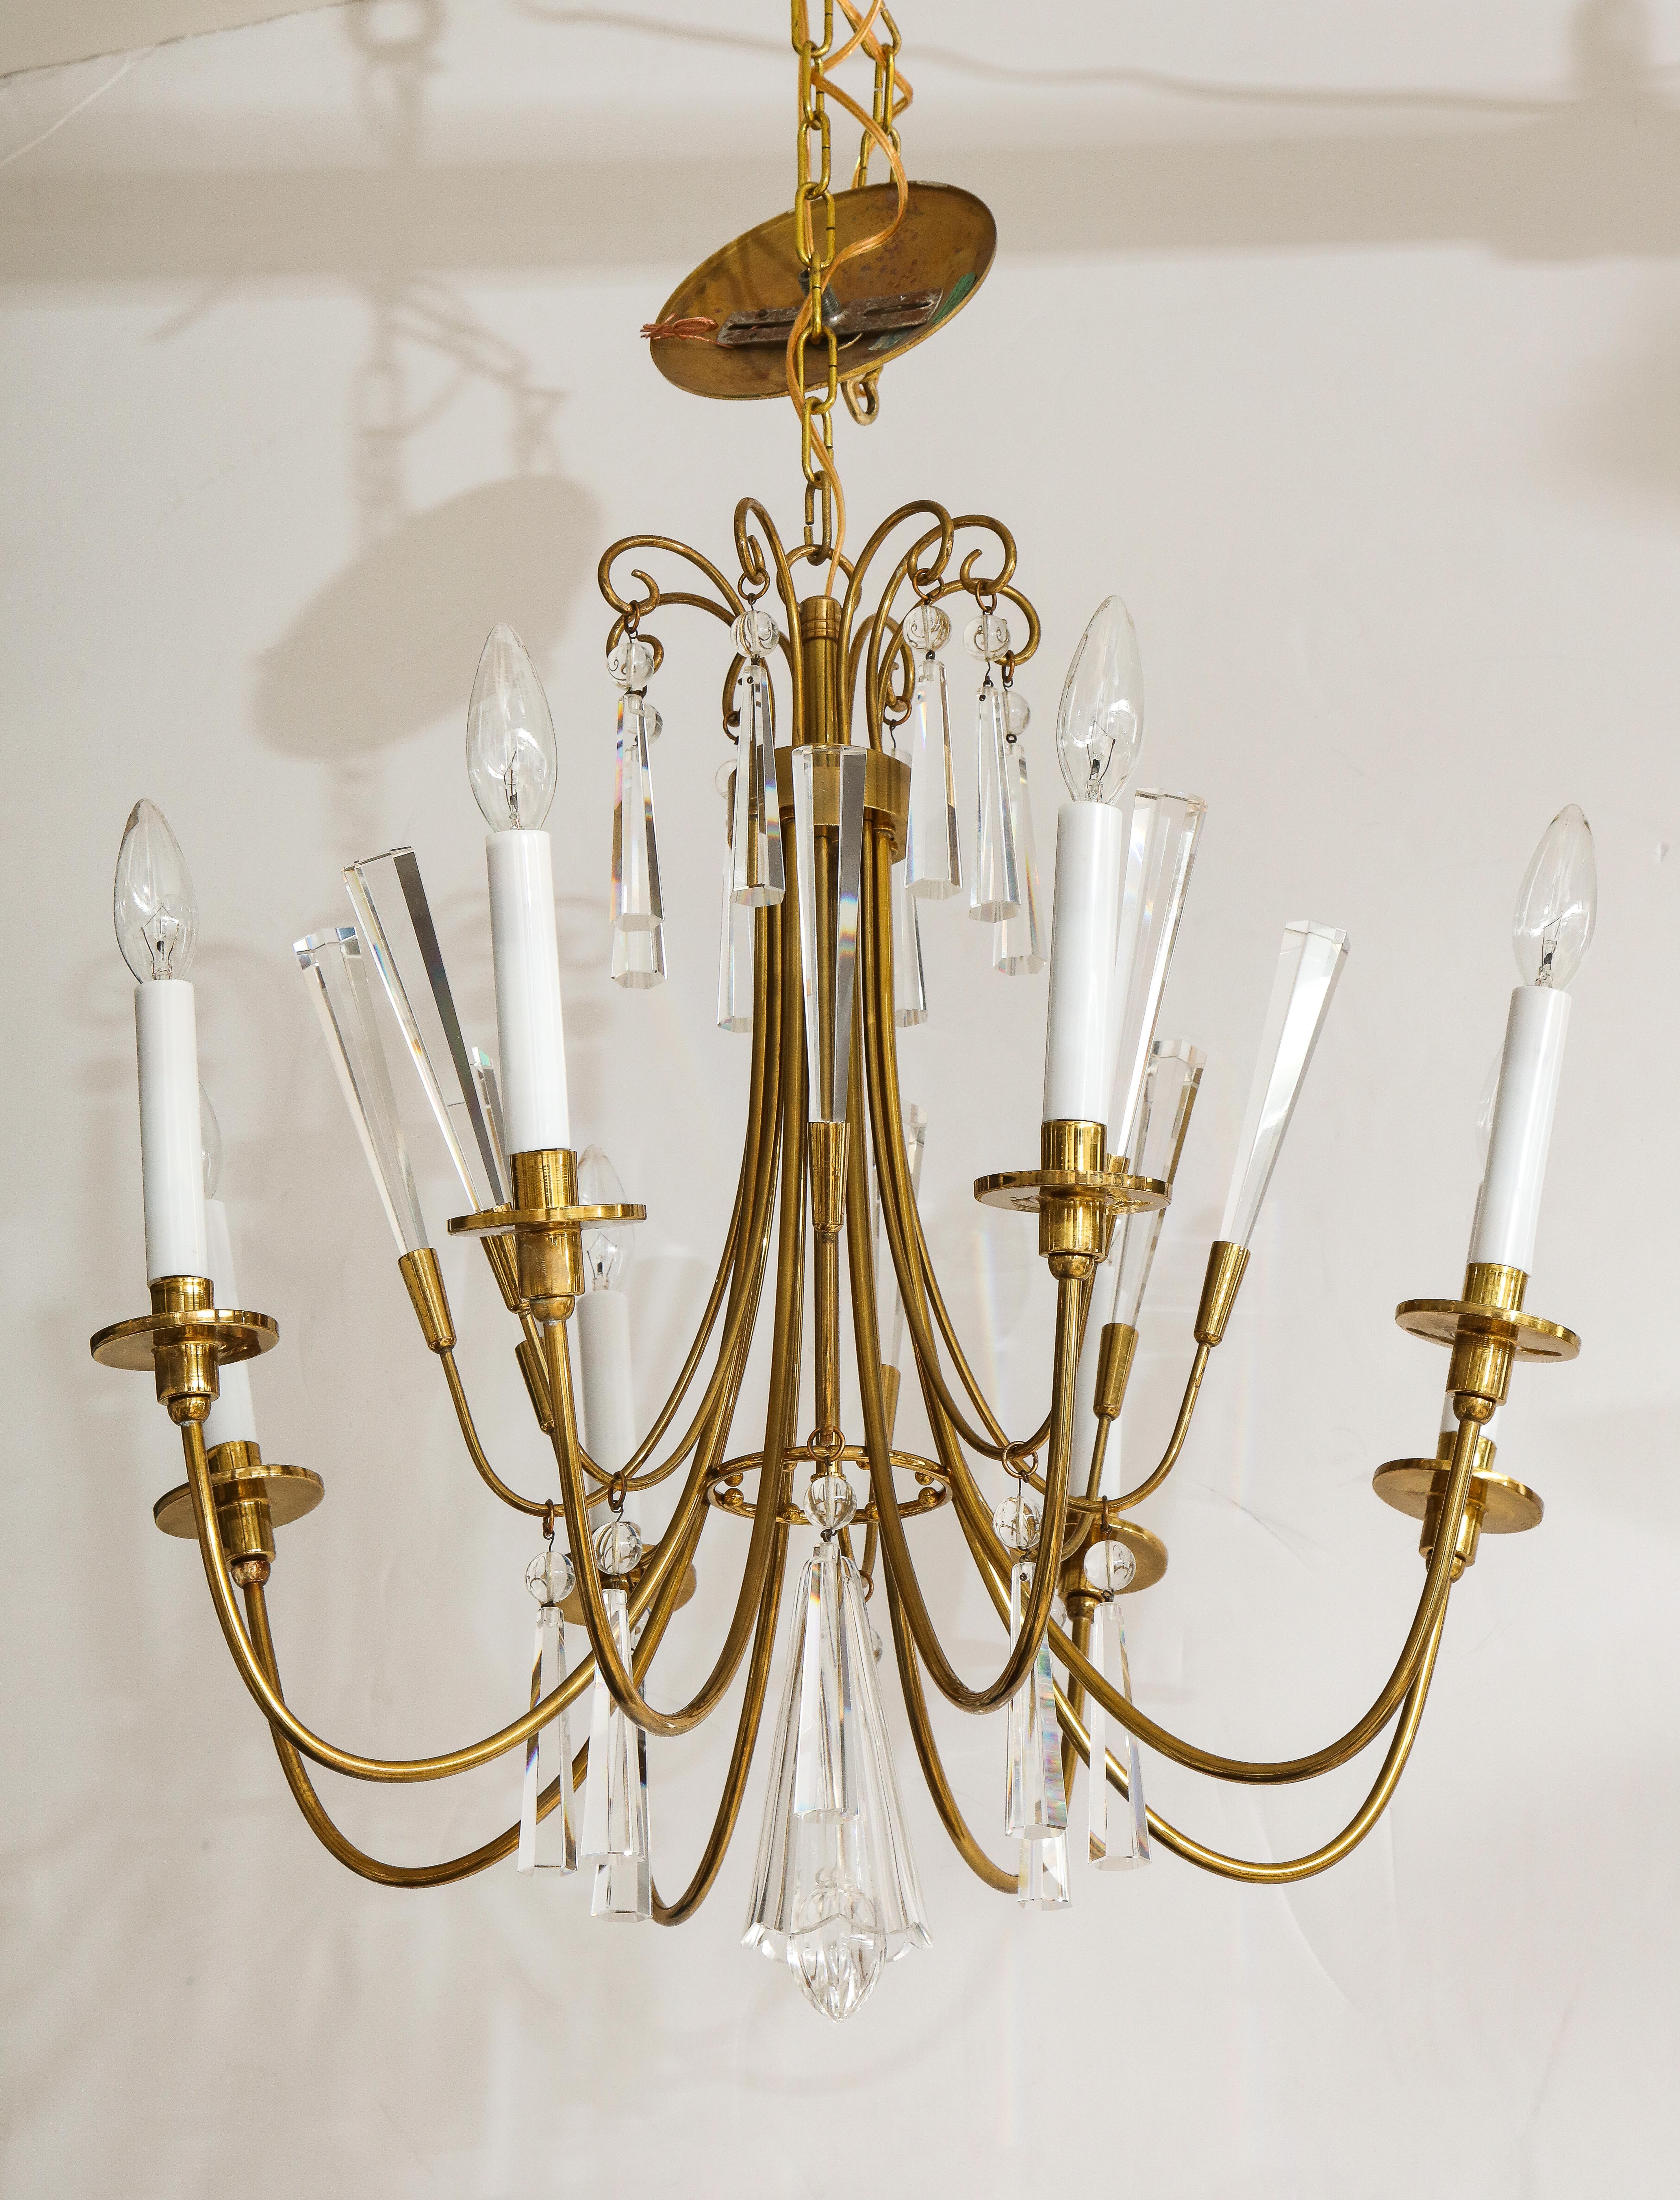 Stunning 1960s modern chandelier in the style of Tommi Parzinger by Lightolier made in Germany, in vintage original condition with beautiful patina to the brass.

Total height including the chain is 45